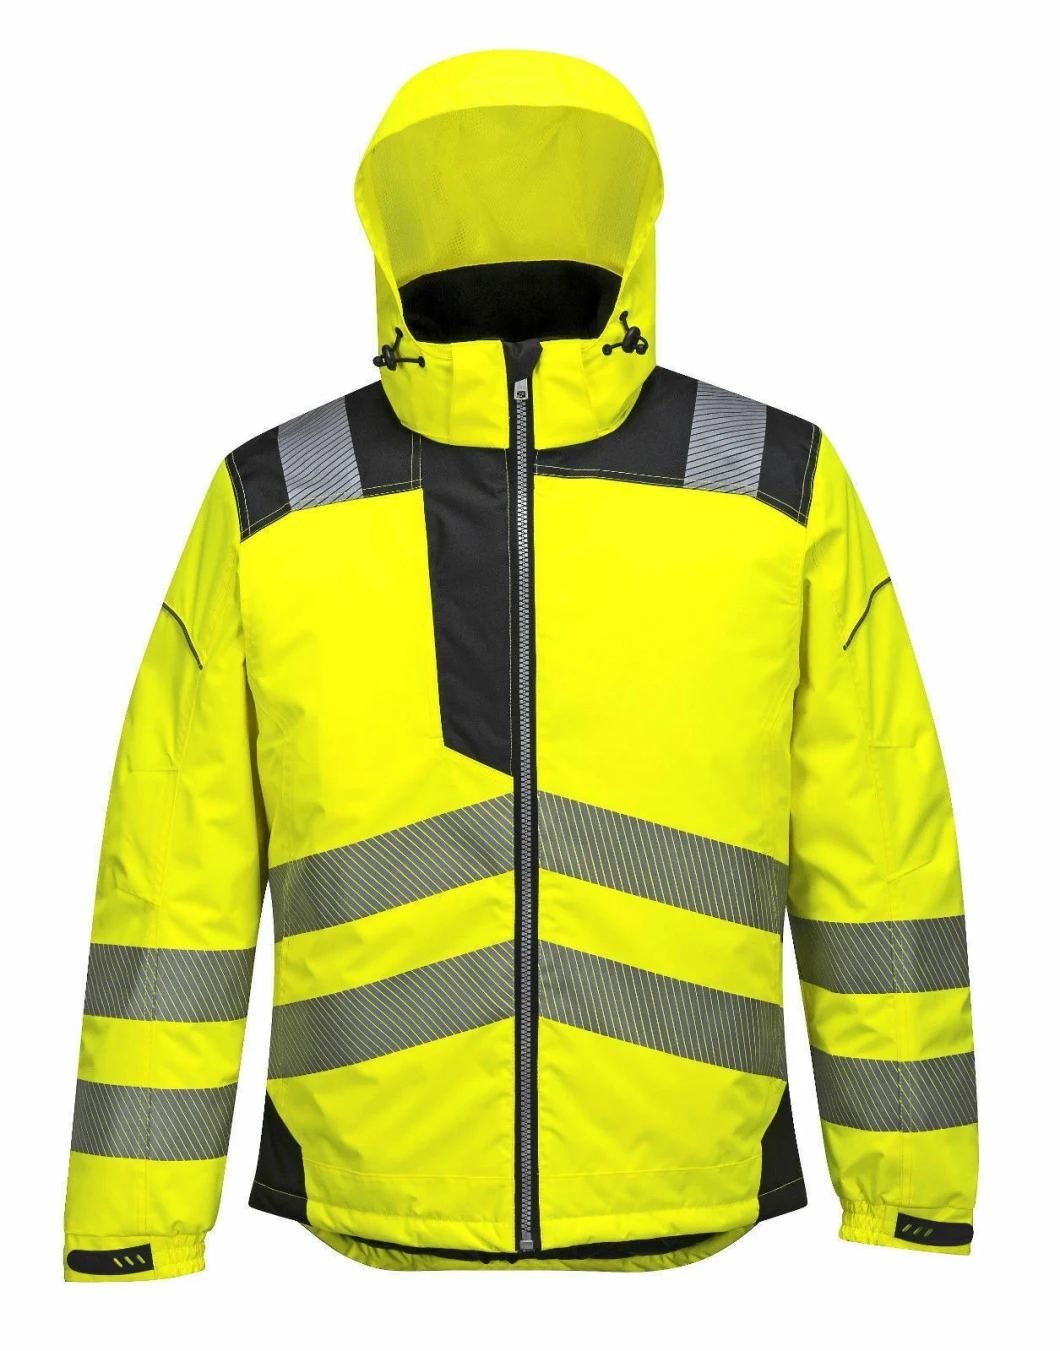 En20471 Factory Supply High Visibility Safety Working Reflective Safety Jackets